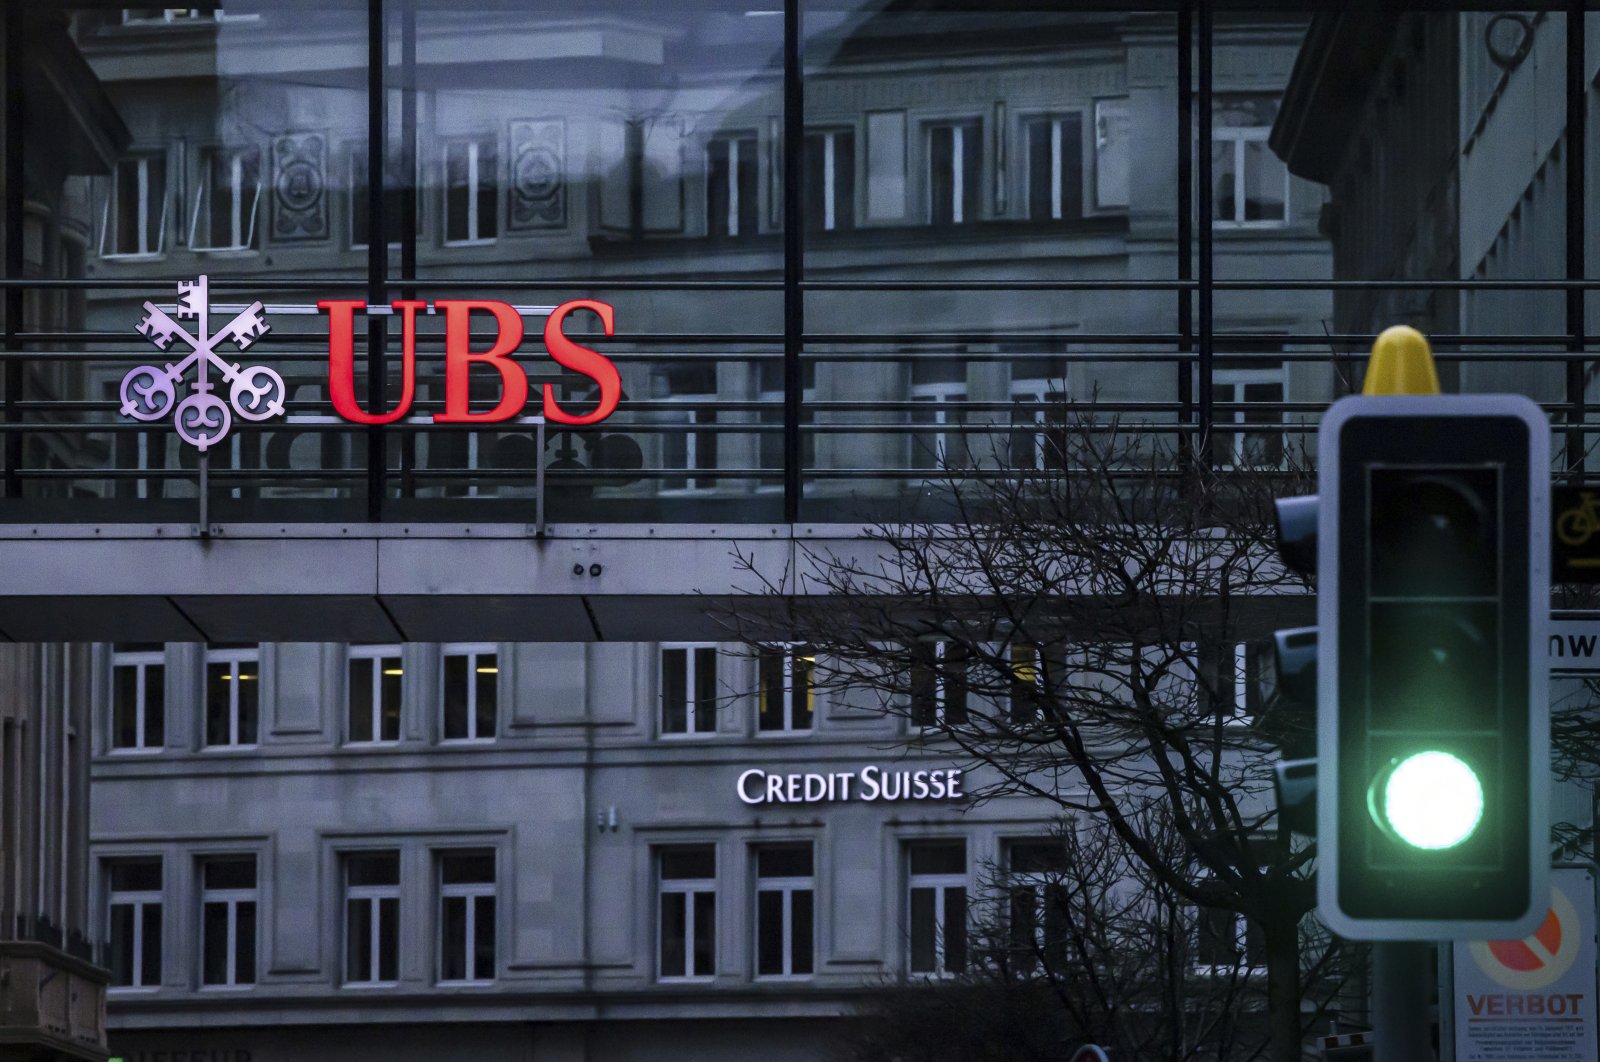 A traffic light signals green in front of the logos of the Swiss banks Credit Suisse and UBS in Zurich, Switzerland, March 19, 2023. ( AP Photo)